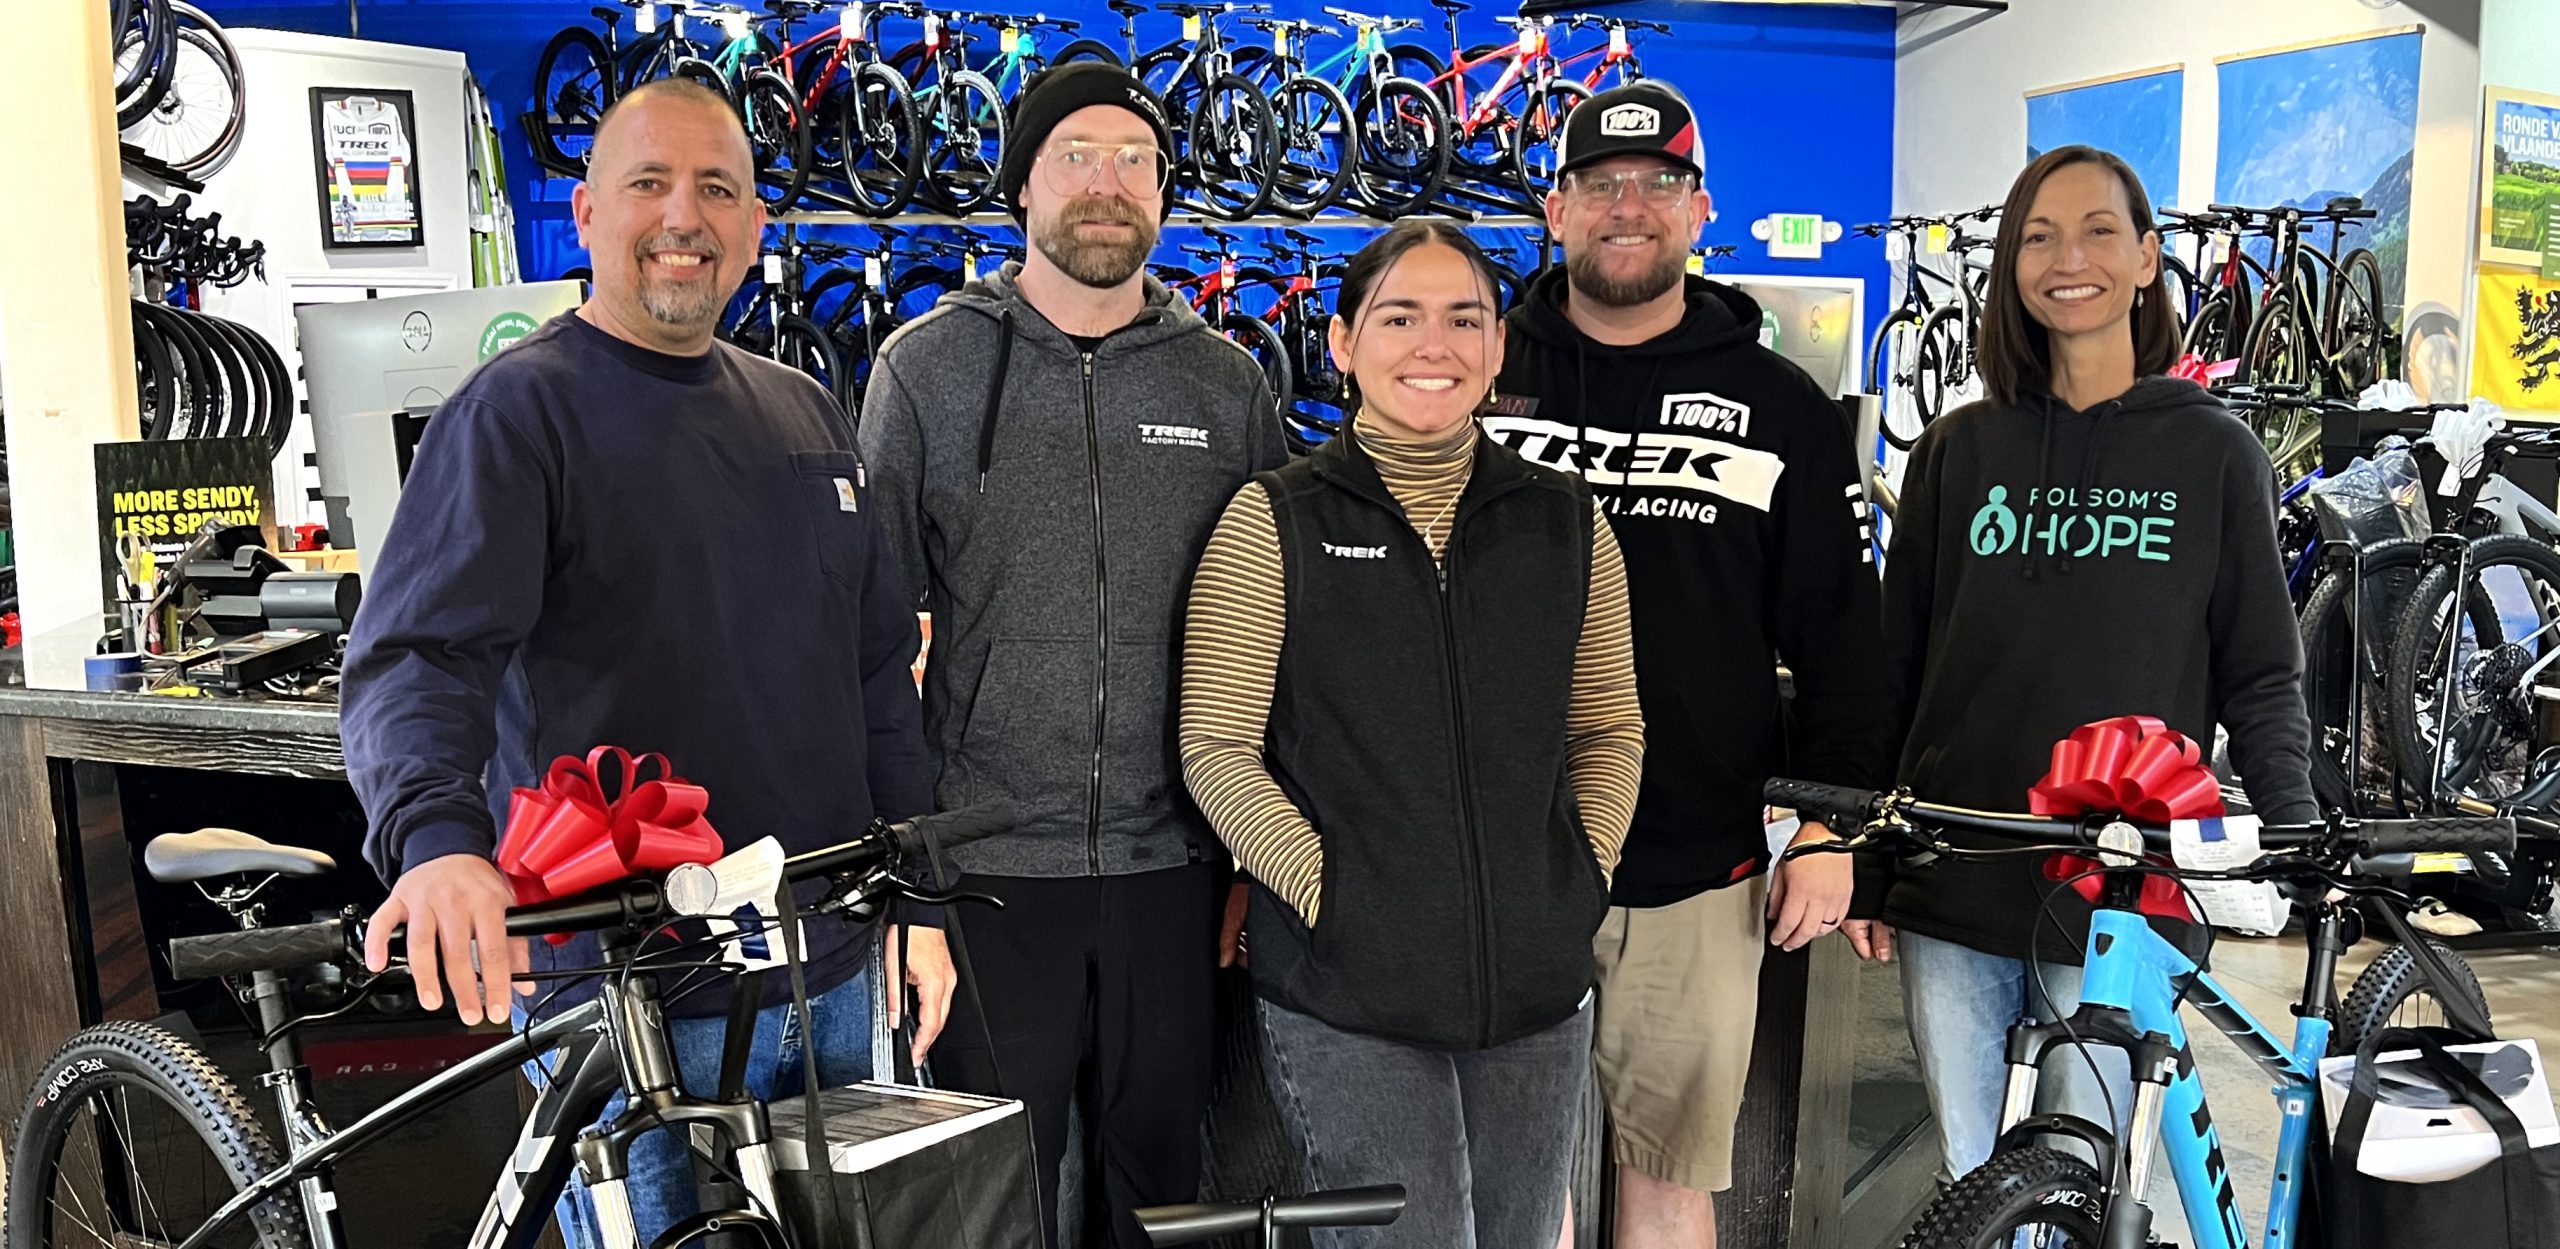 Folsom bike shop, local donor team up to help two students in need